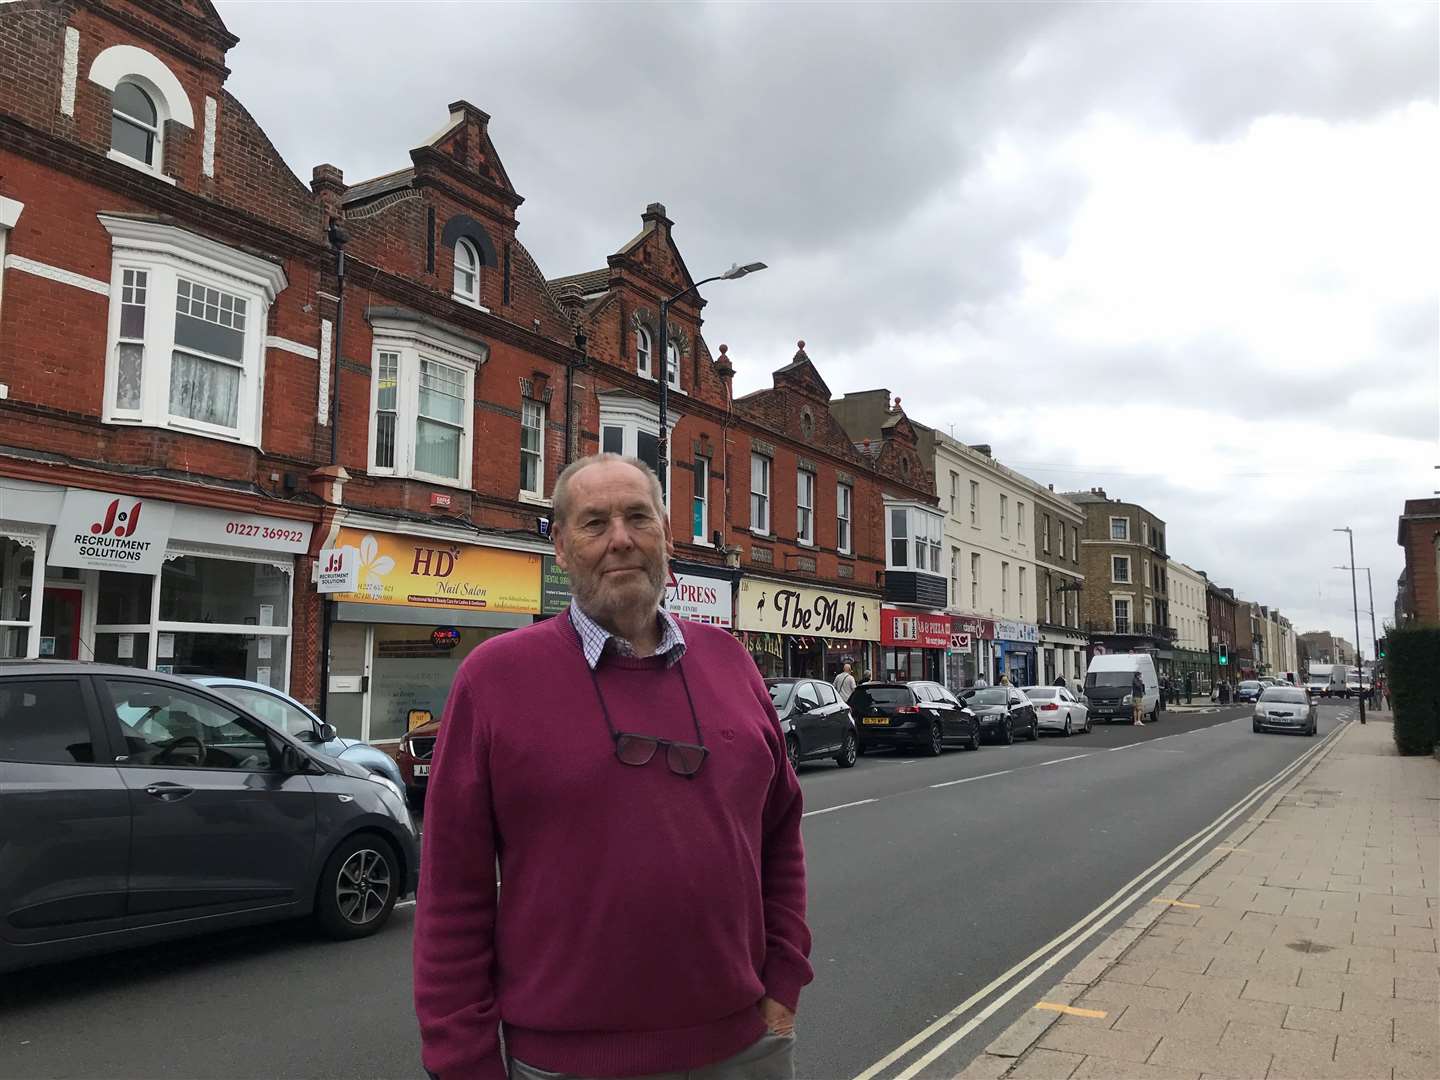 Herne Bay resident Michael Taylor objected to the scheme last year